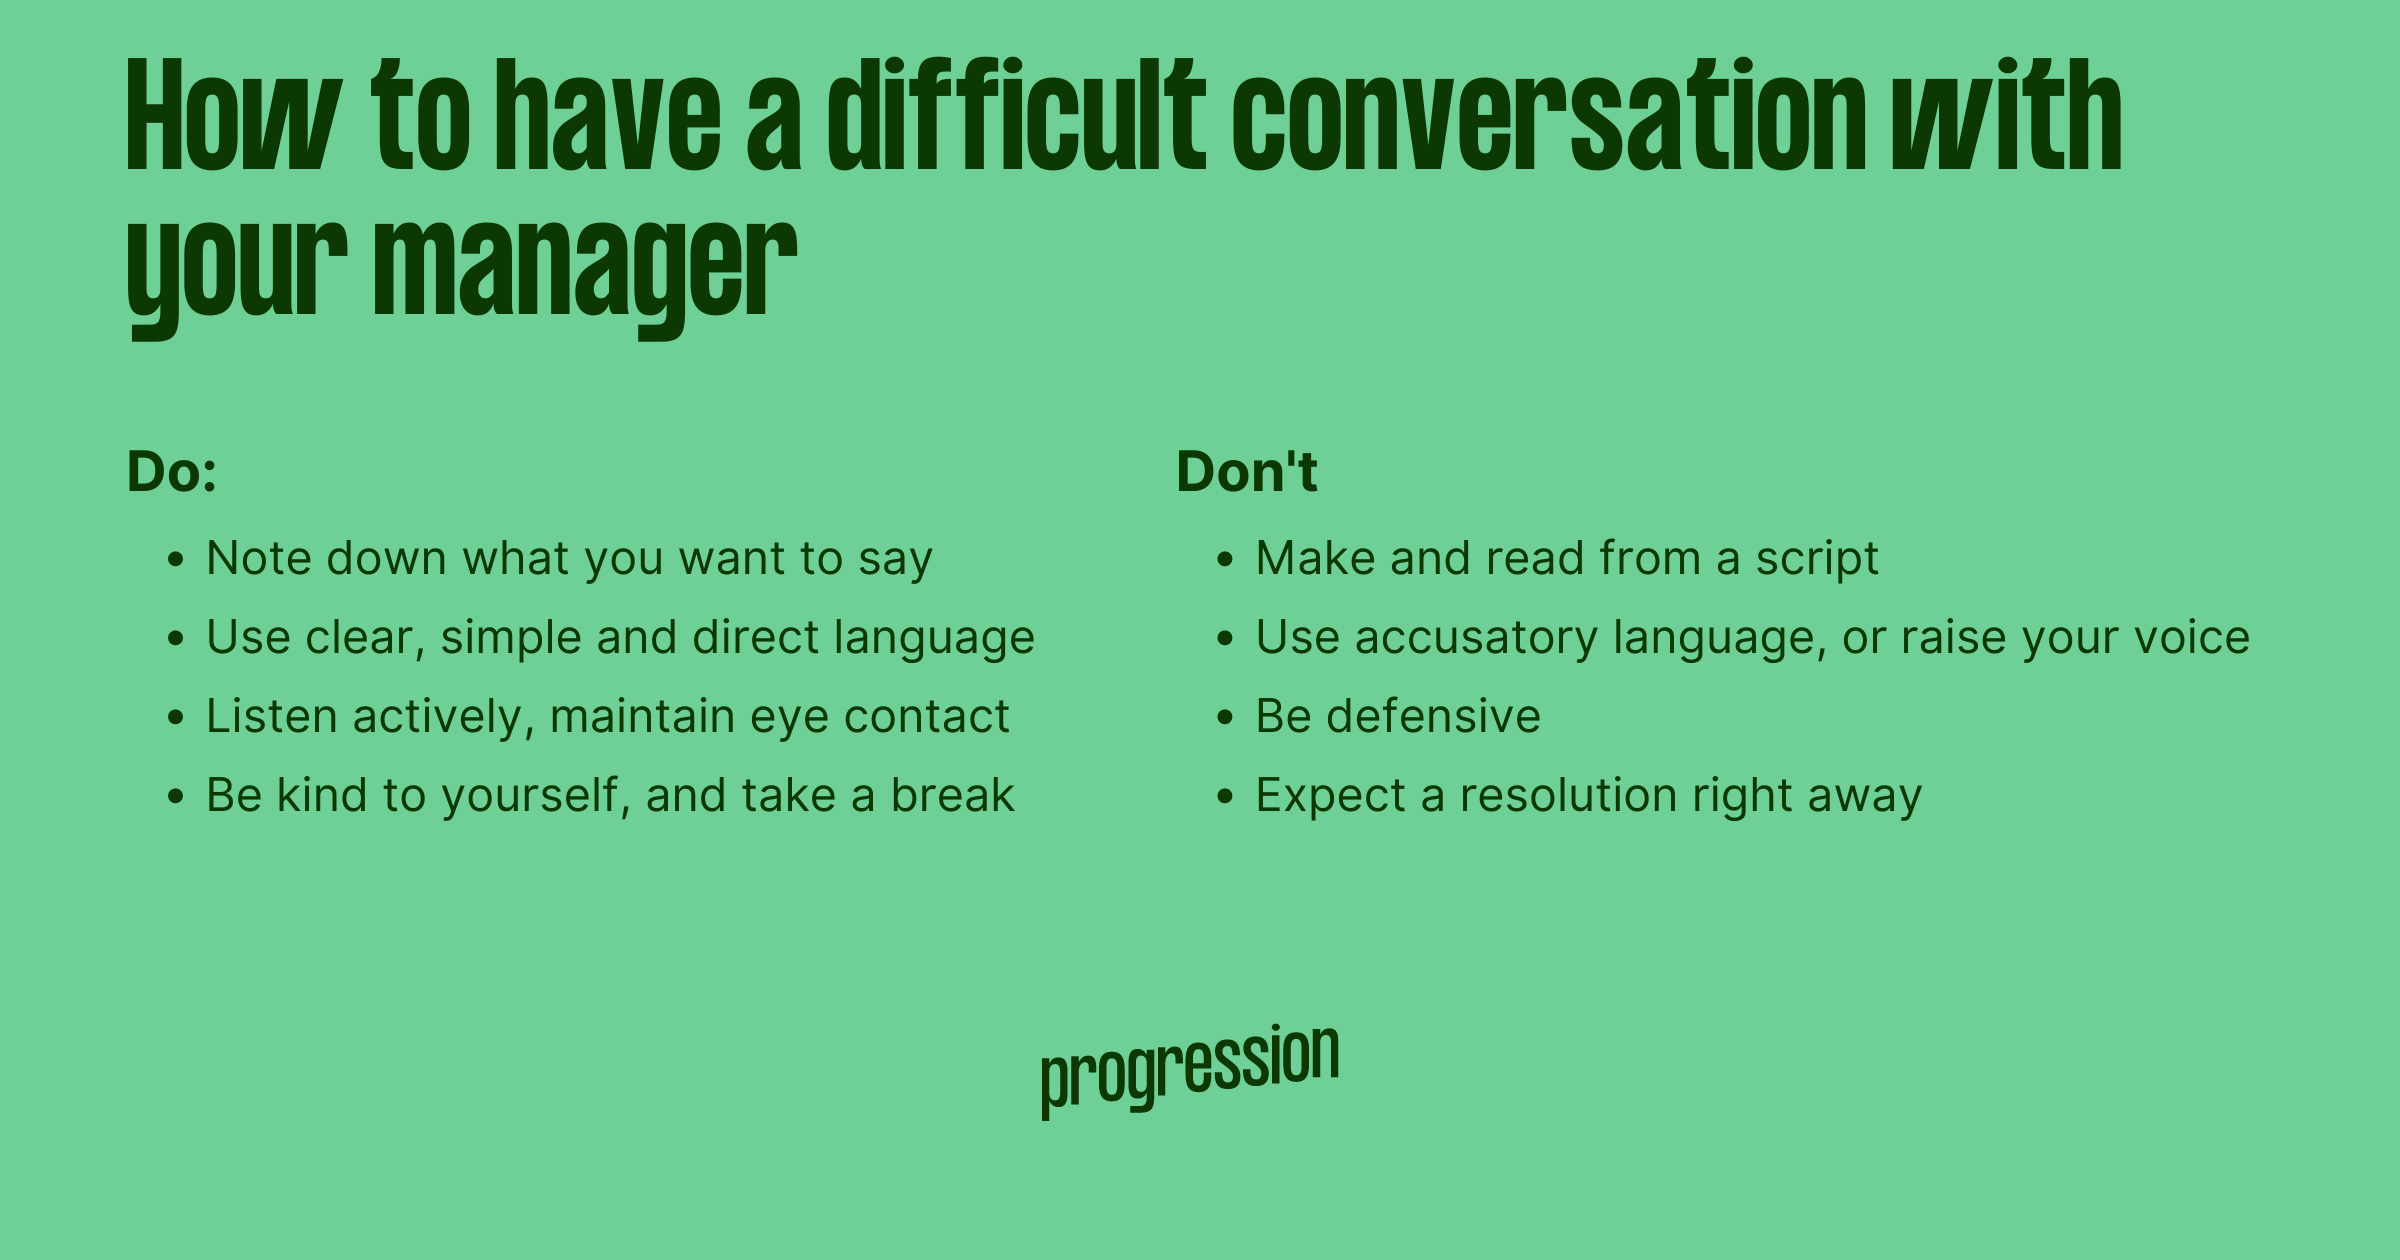 How to have a difficult conversation with your manager dos and don’ts